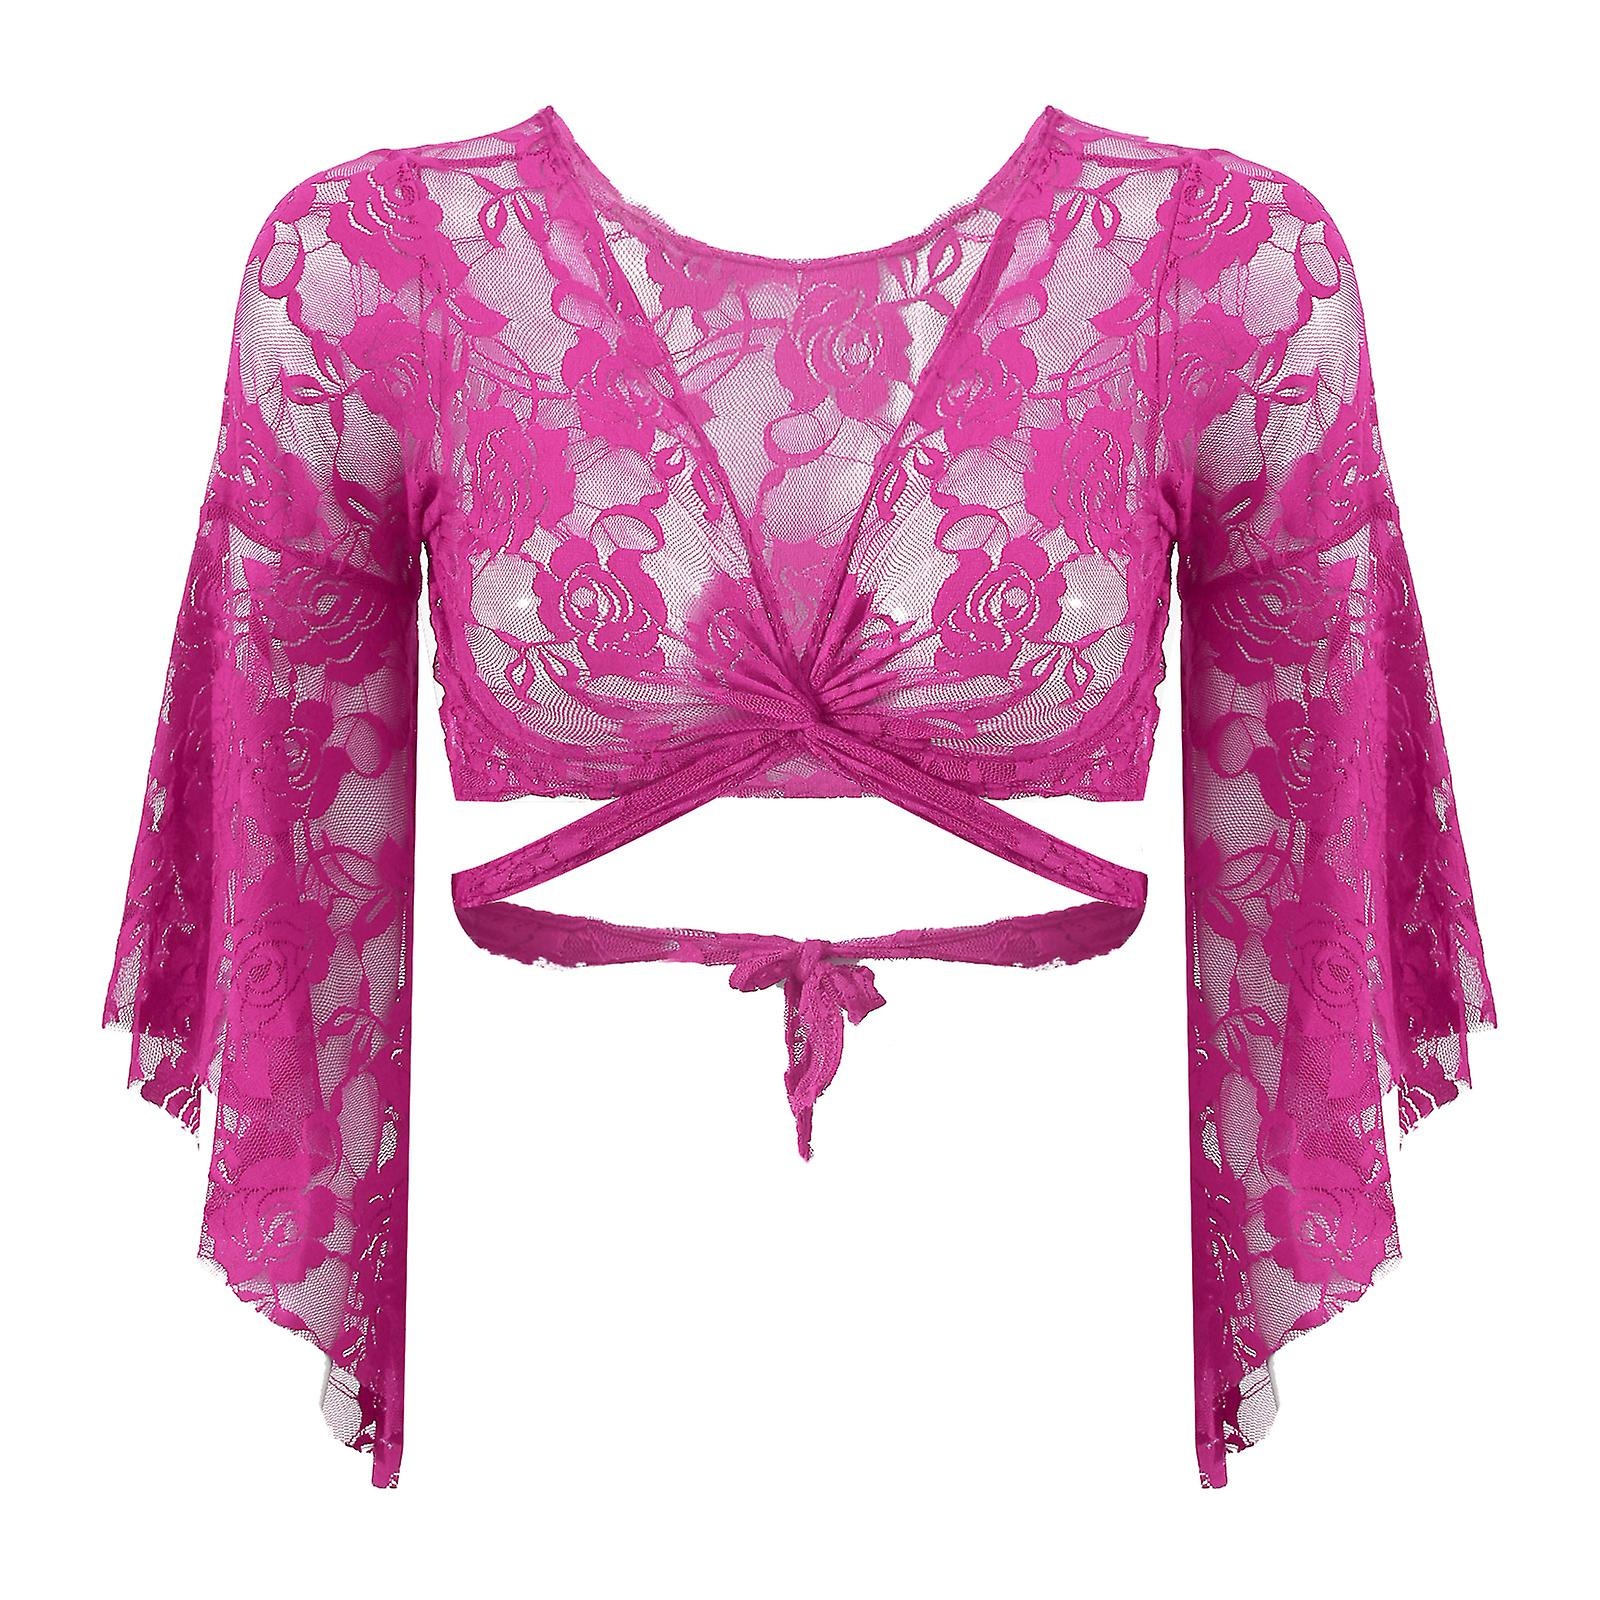 Fuchsia lace top with trumpet sleeve